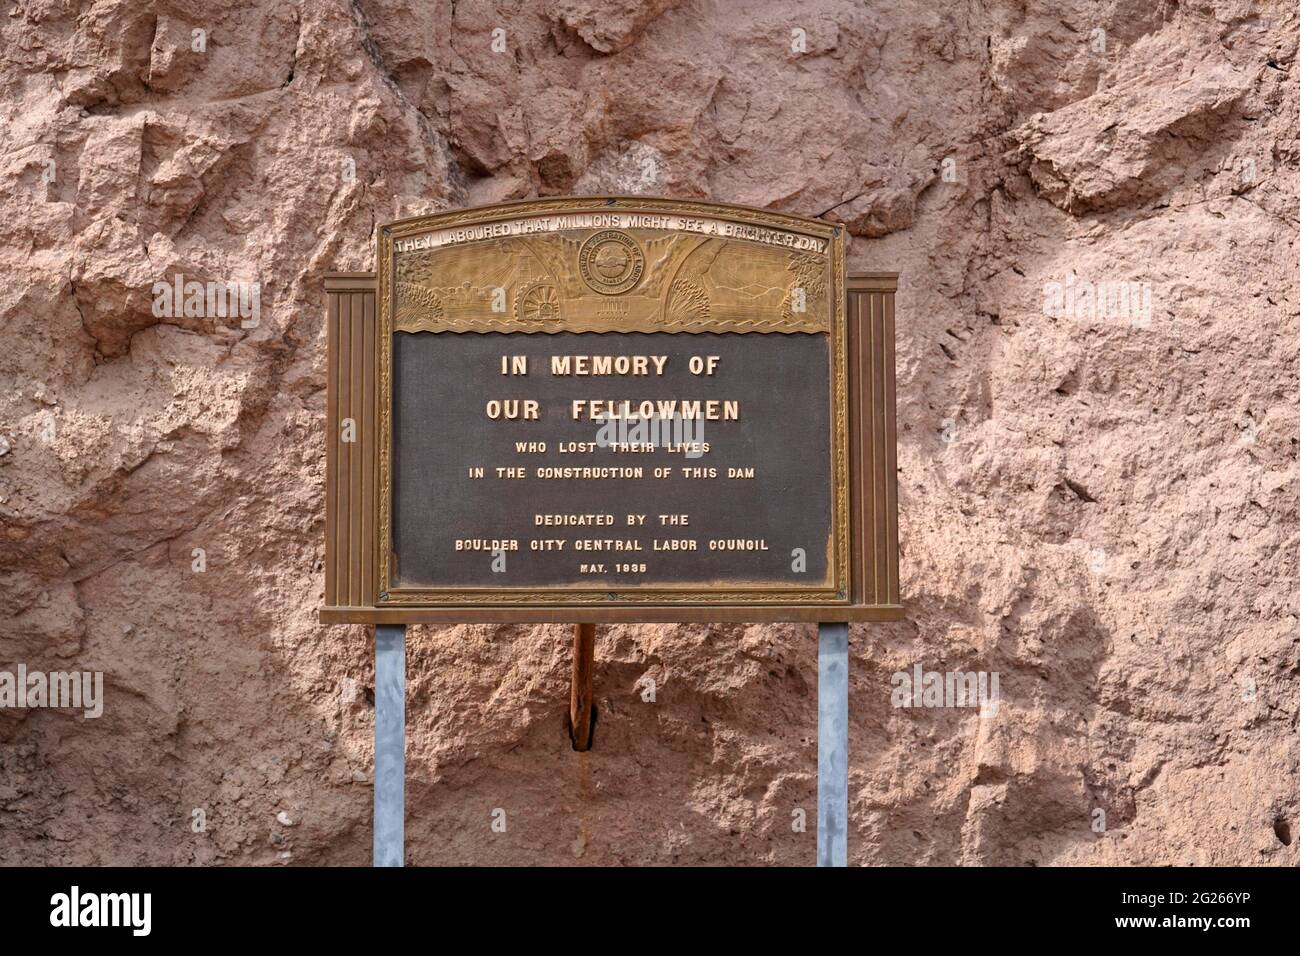 A memorial sign at Hoover Dam honoring construction workers, Sunday, March 7, 2021, near Boulder City, Nev. Stock Photo